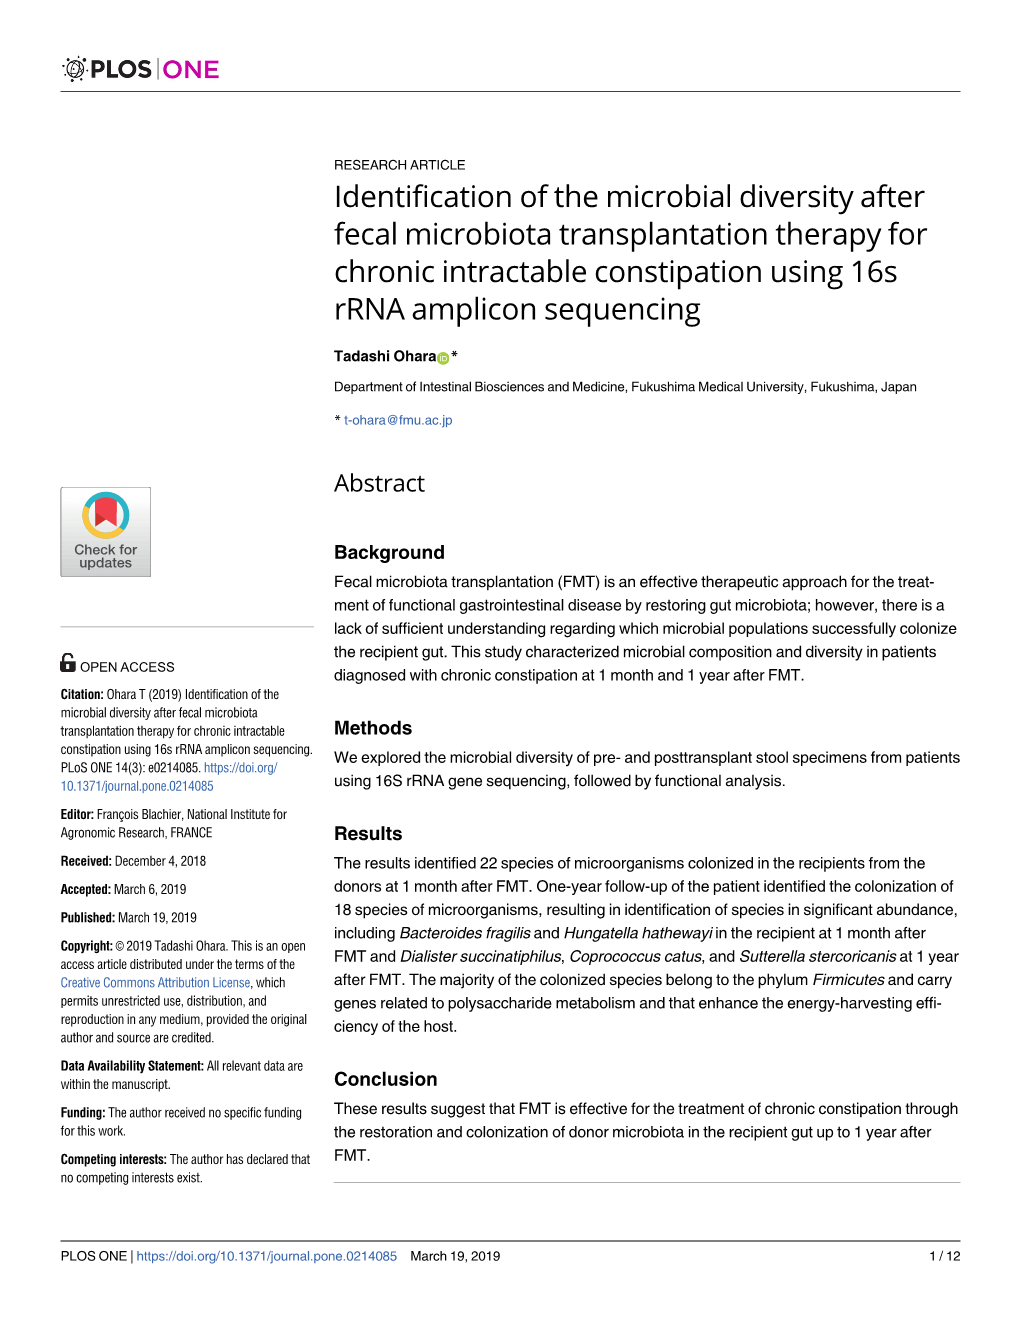 Identification of the Microbial Diversity After Fecal Microbiota Transplantation Therapy for Chronic Intractable Constipation Using 16S Rrna Amplicon Sequencing